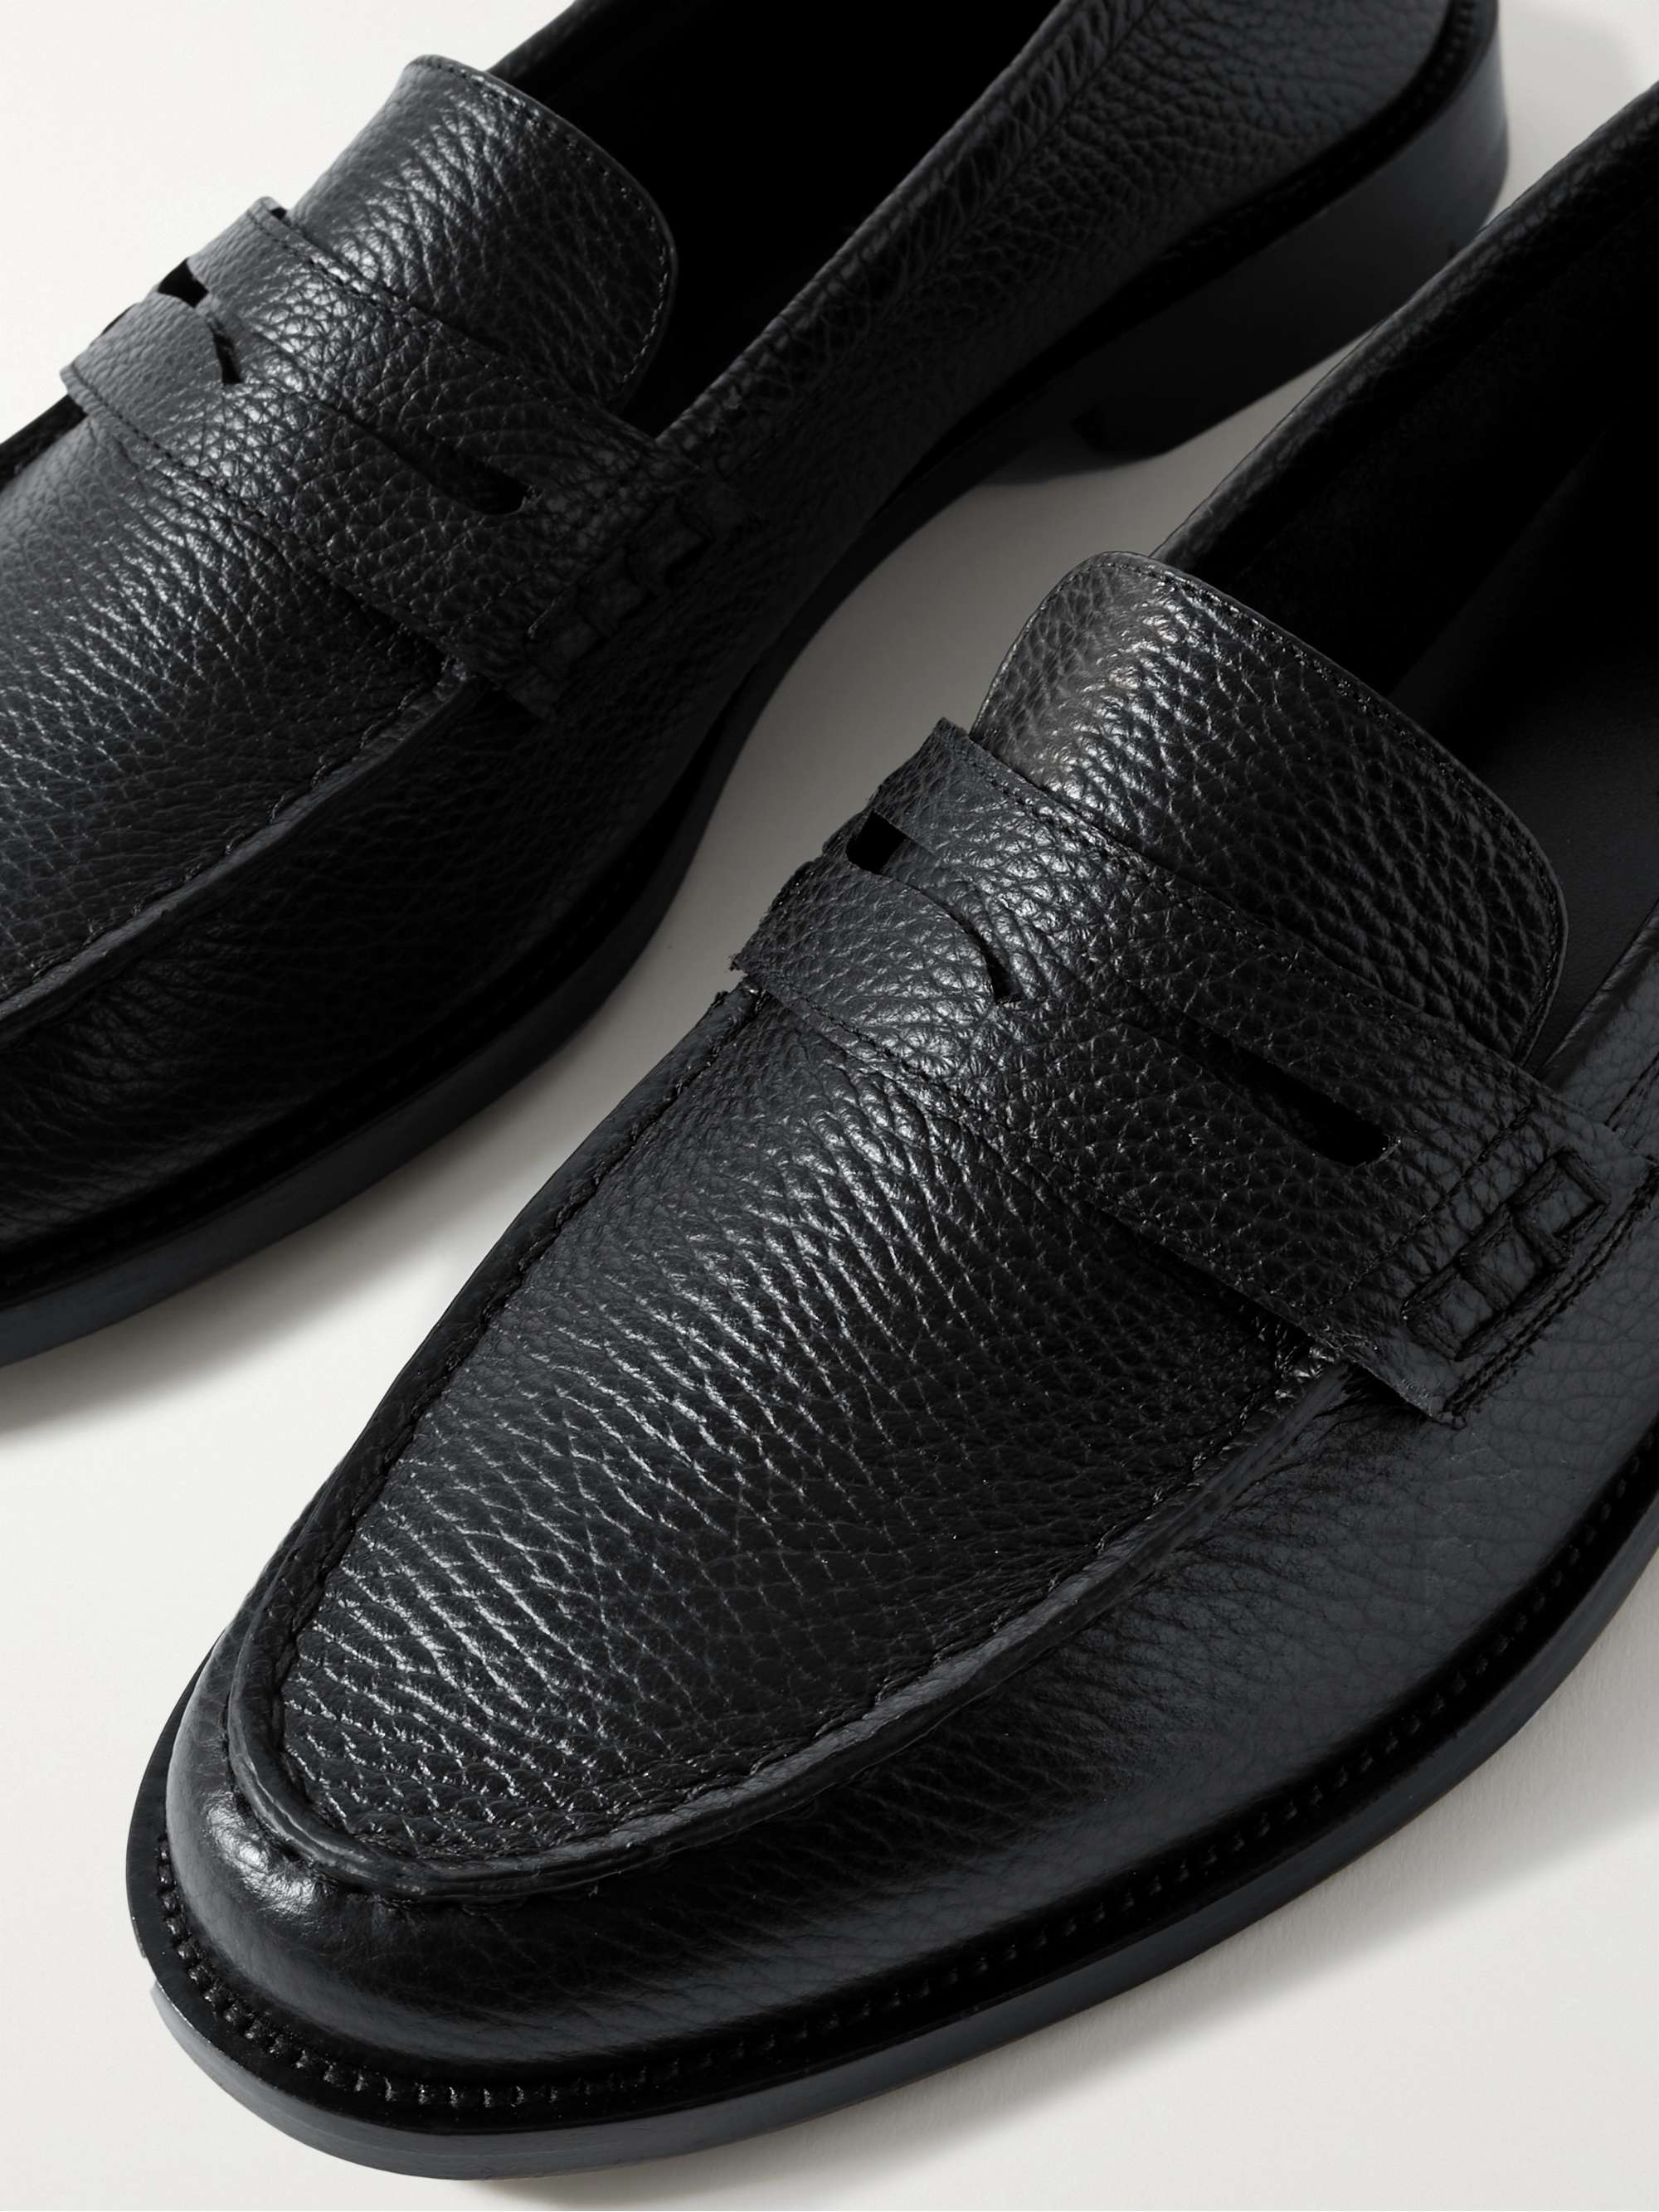 Perry Full-Grain Leather Penny Loafers